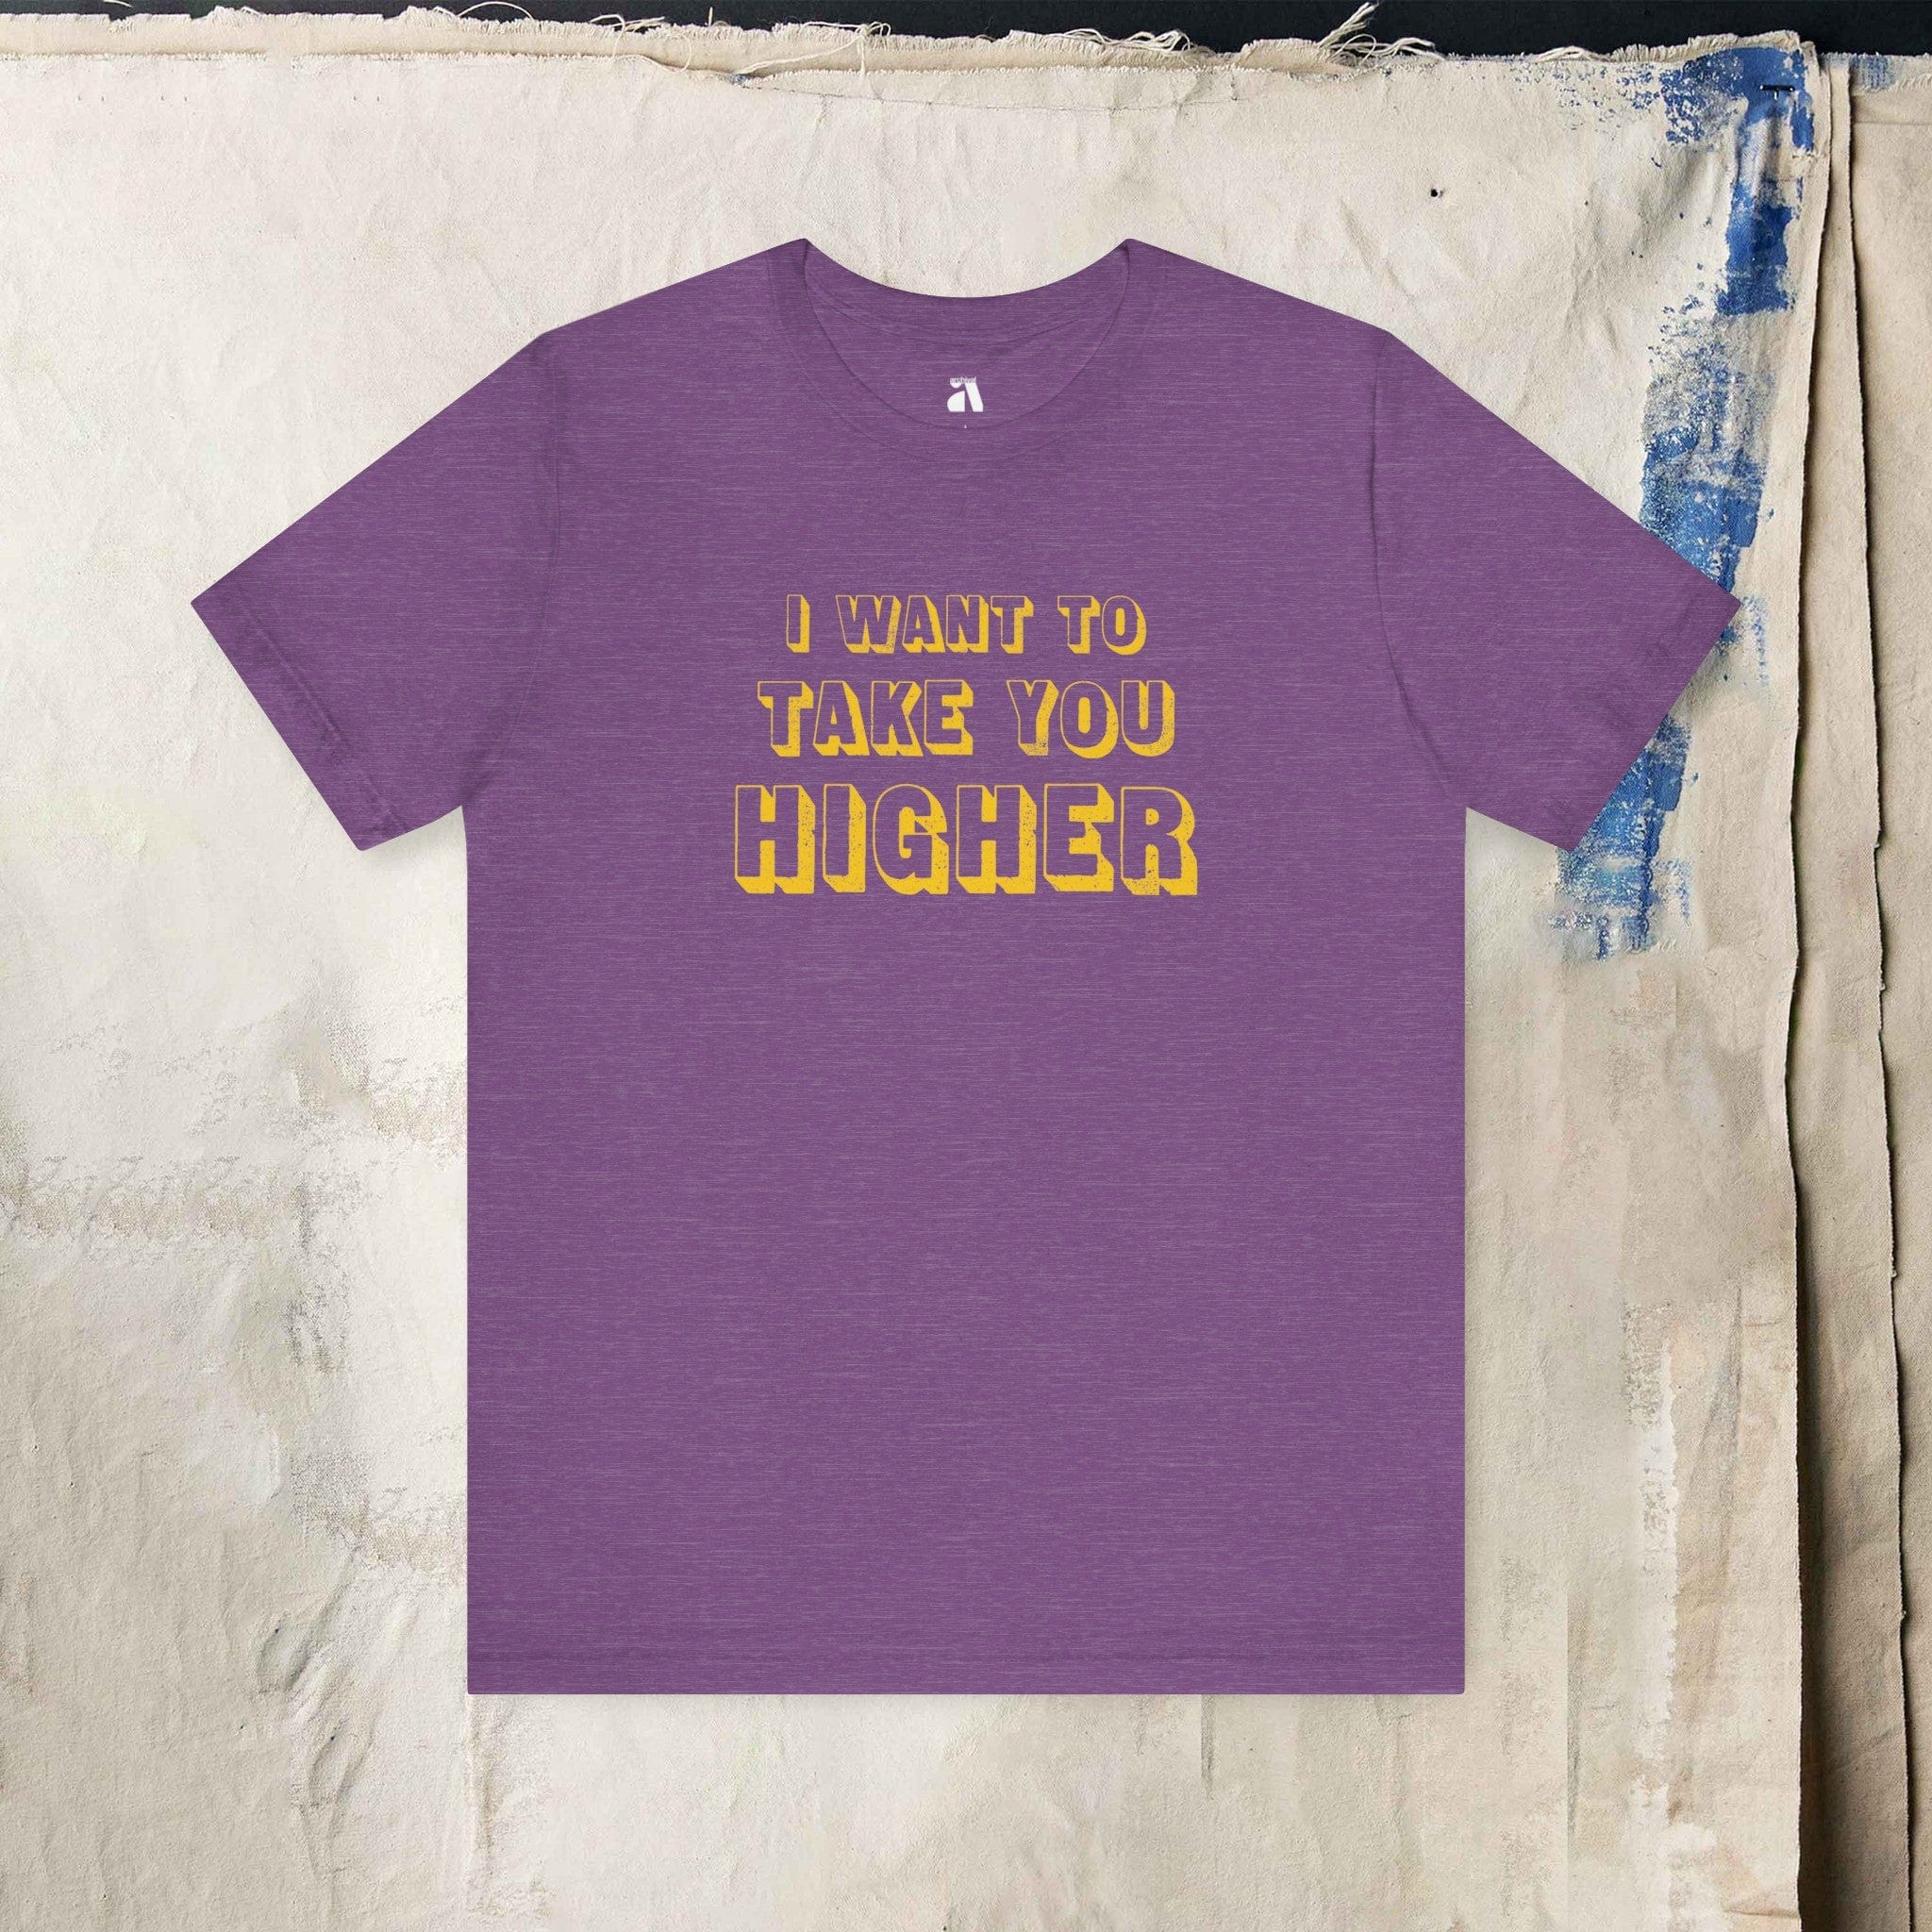 I Want To Take You Higher: Sly T-Shirt